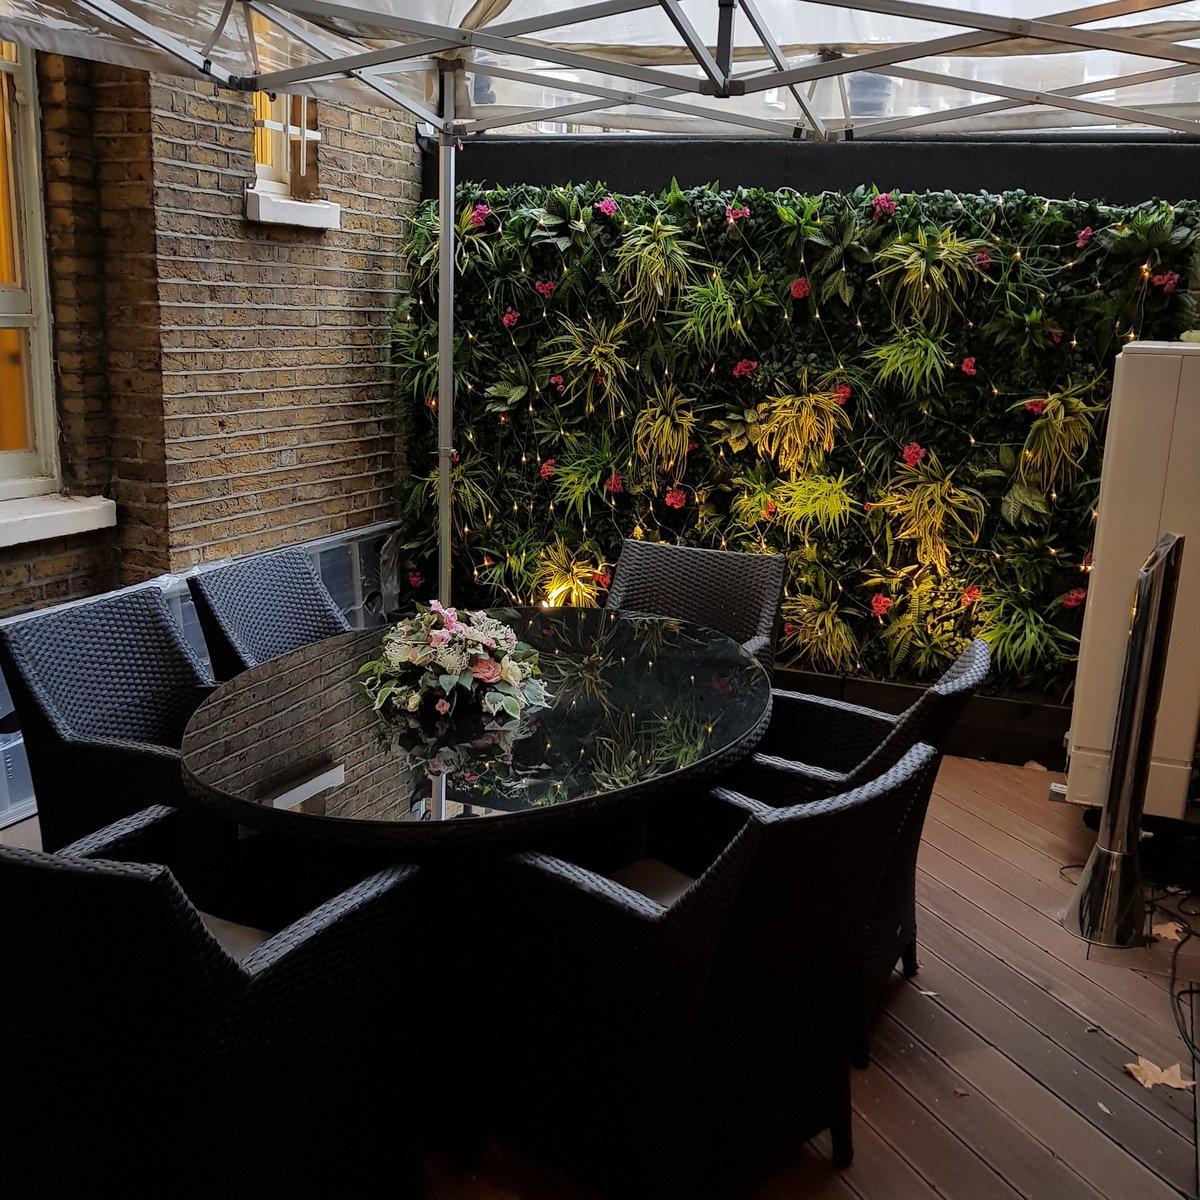 Our Belgravia Pimlico Road gallery has a welcoming enclosed courtyard. It has been a firm favourite with clients as a cozy outdoor viewing area.
@ThePimlicoRoad
#courtyard
#pimlicoroad
#belgravia
#sheltered
#popupshelter
#livingwall
#decking